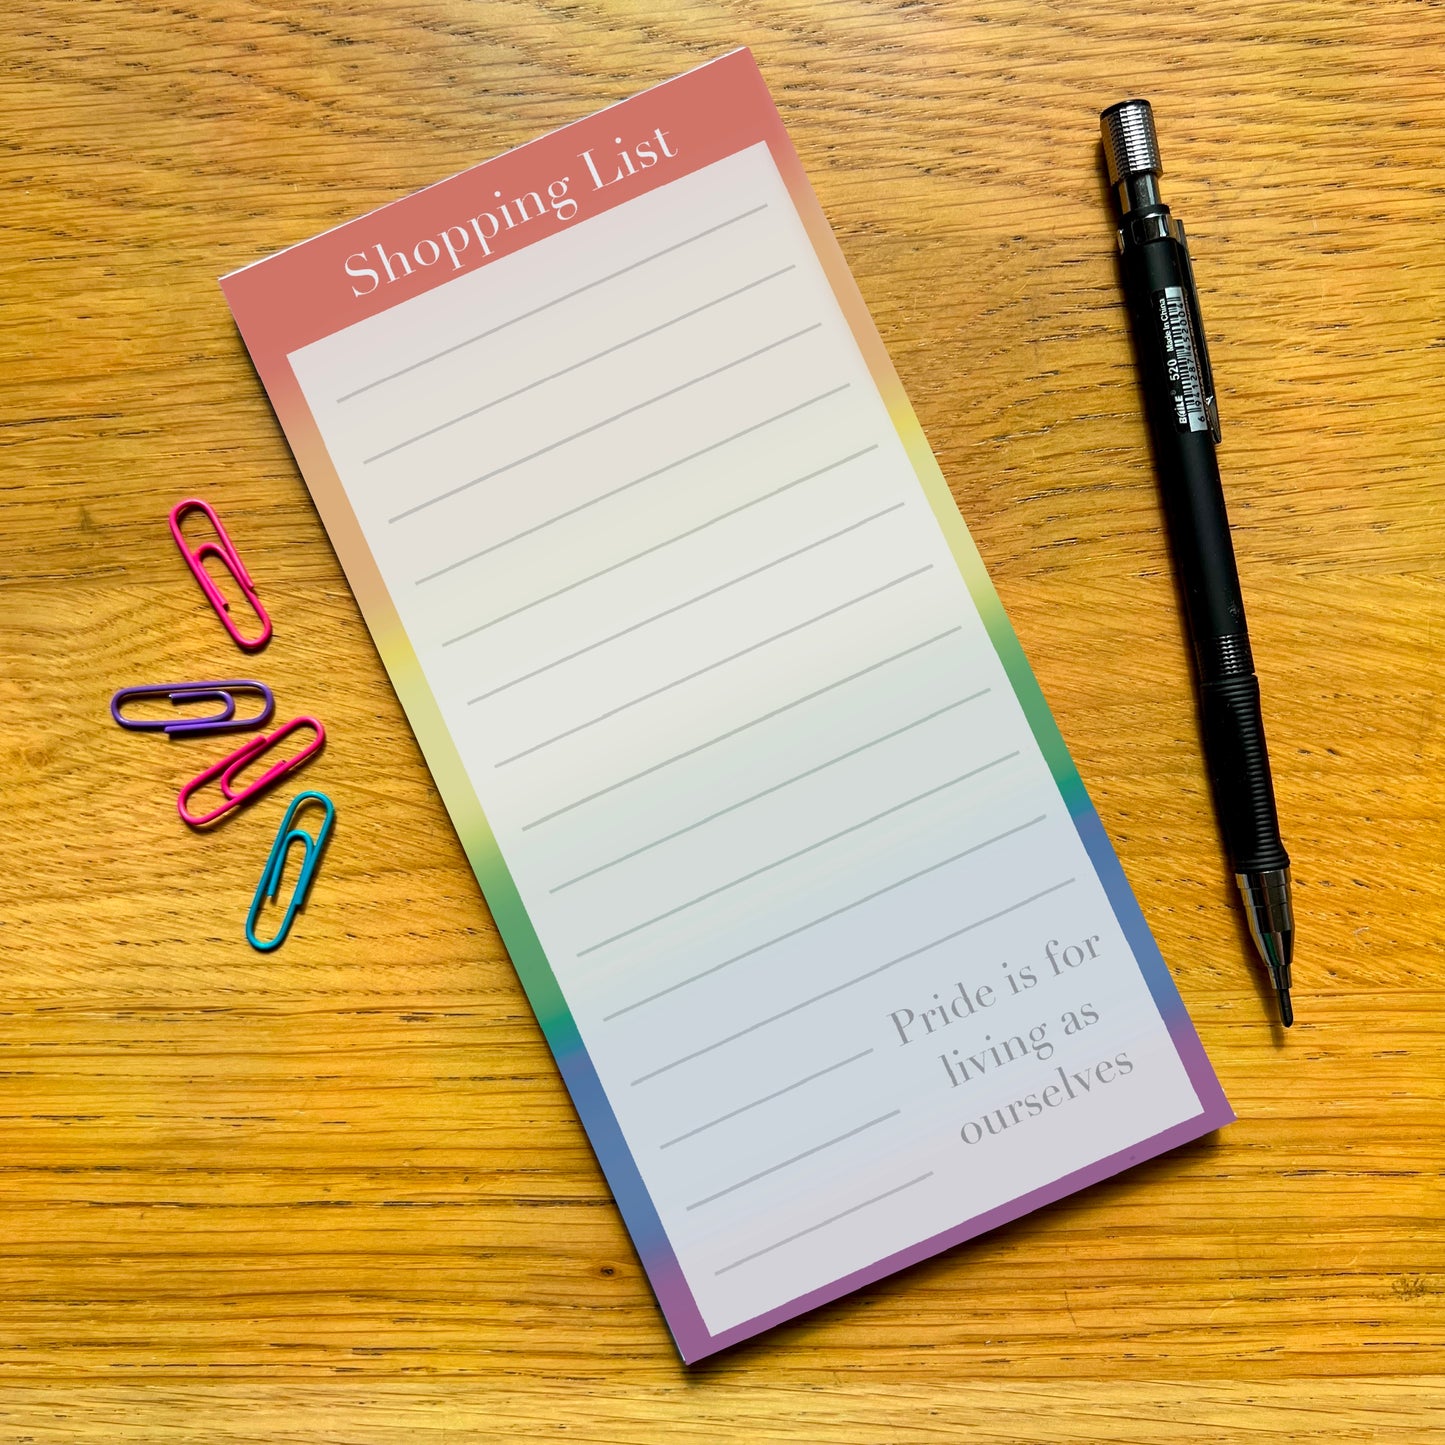 Rainbow shopping list with quote Pride is for living as ourselves, on a wooden desk